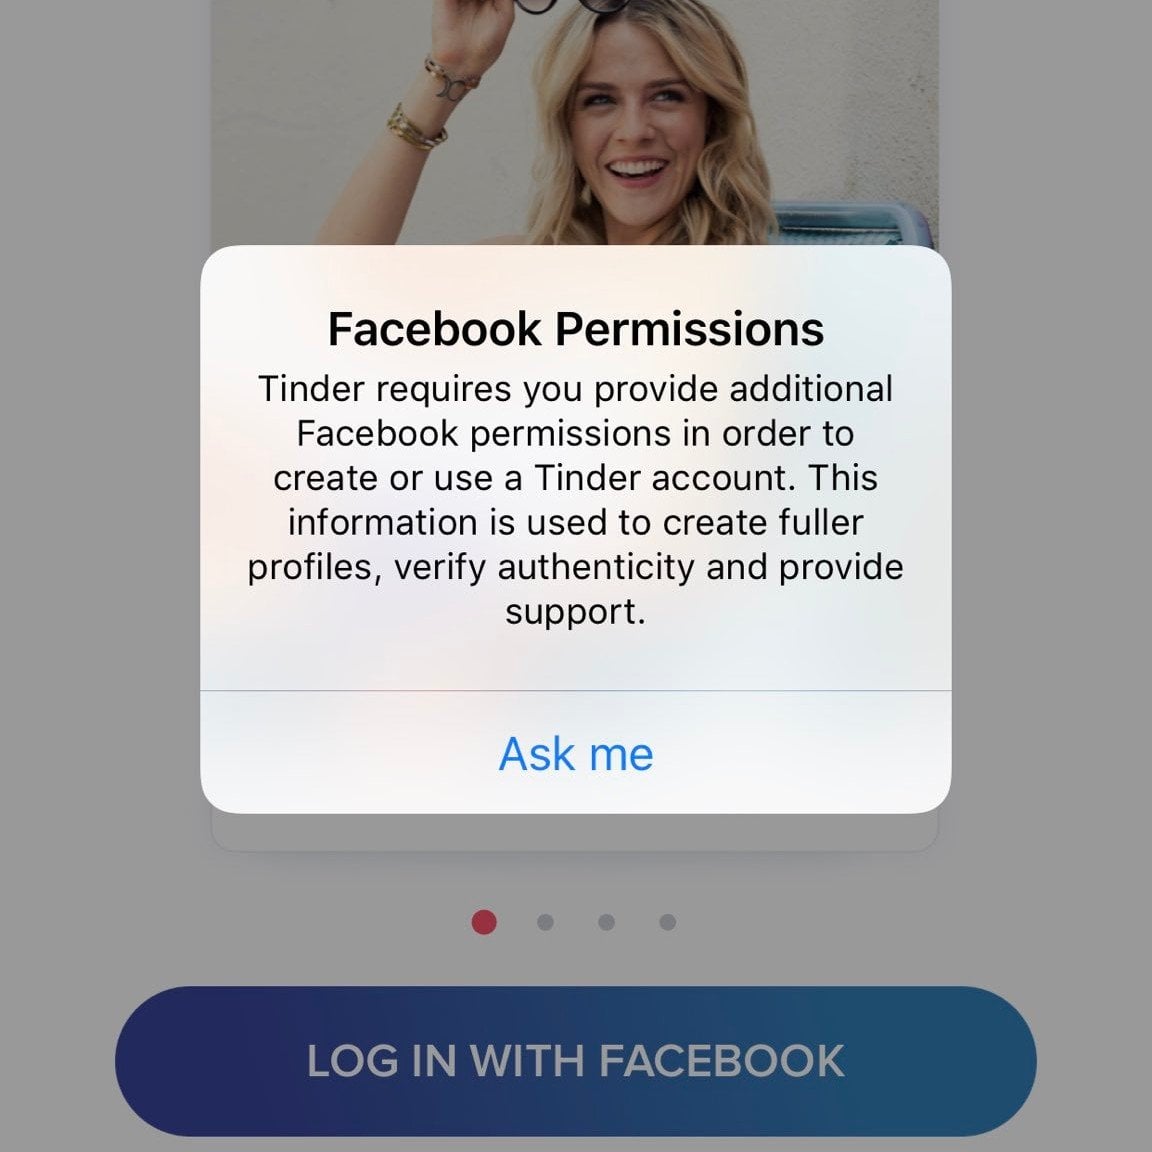 Bumble wont let me sign in with facebook